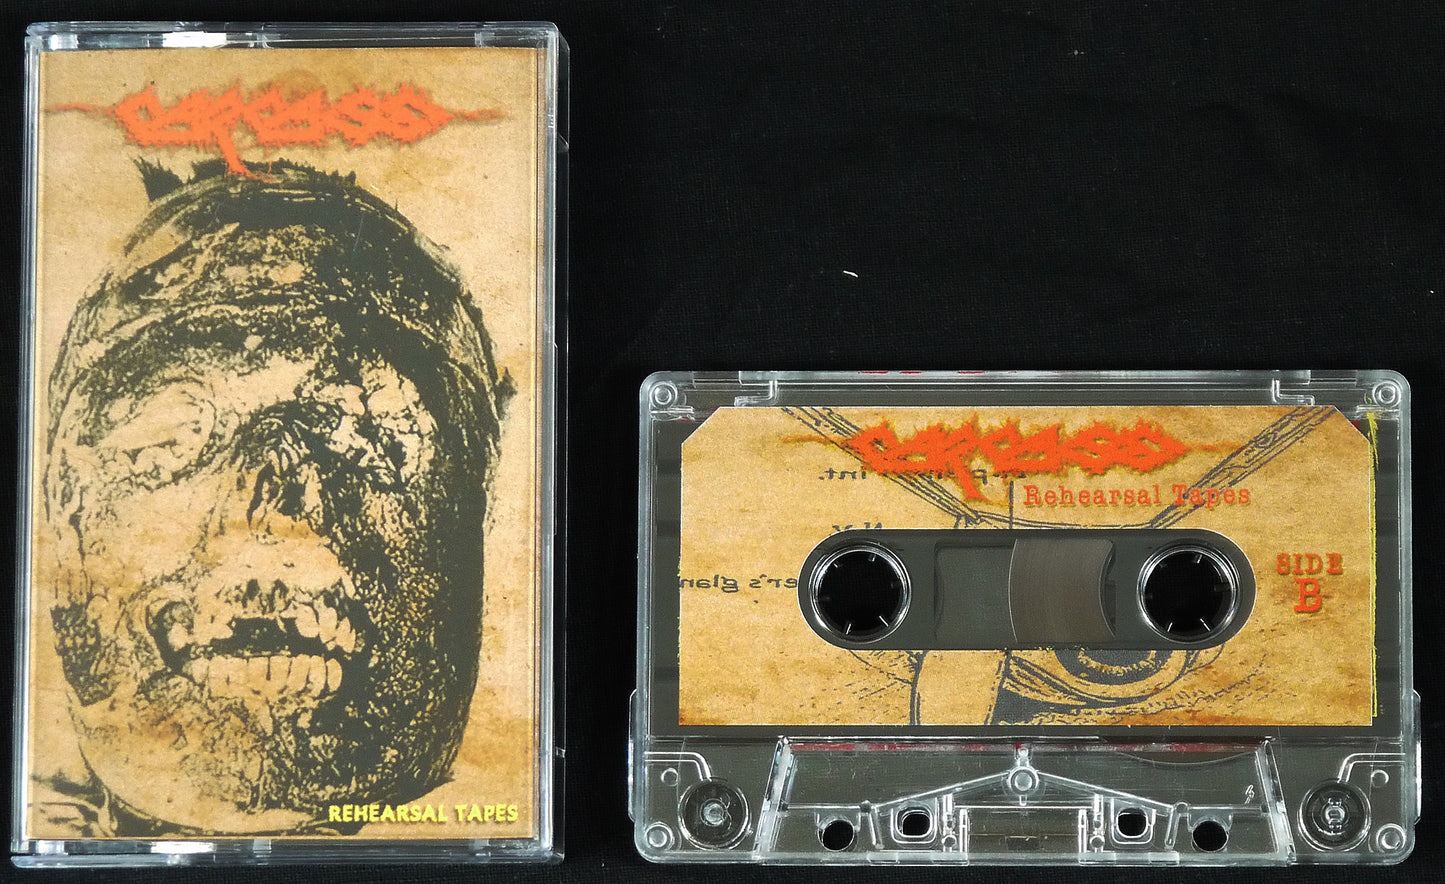 CARCASS - Rehearsal Tapes MC Tape